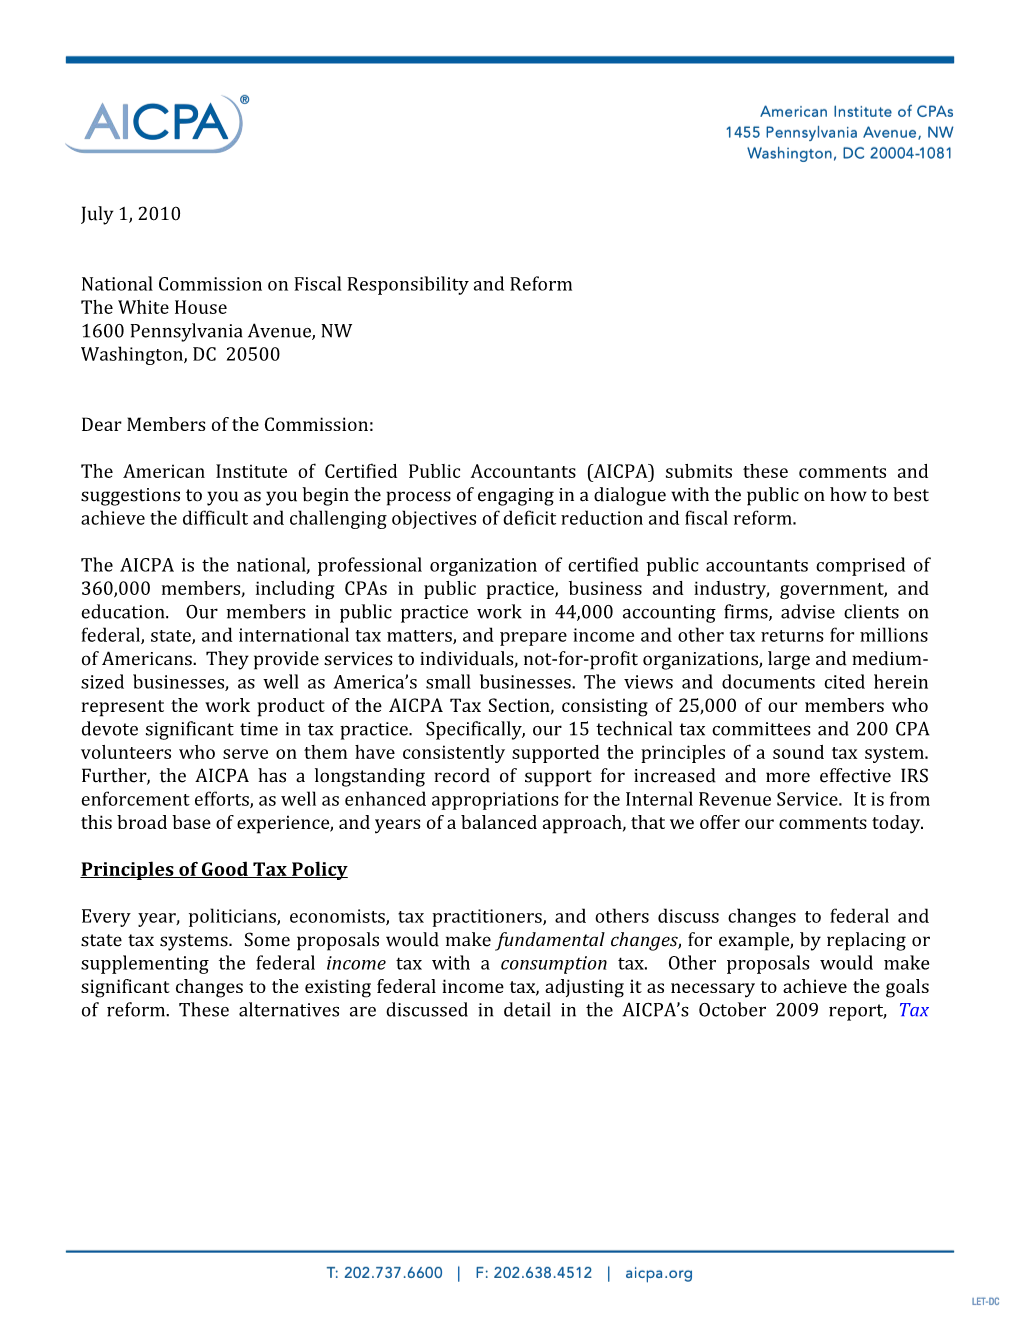 AICPA Letter to National Commission on Fiscal Responsibility and Reform